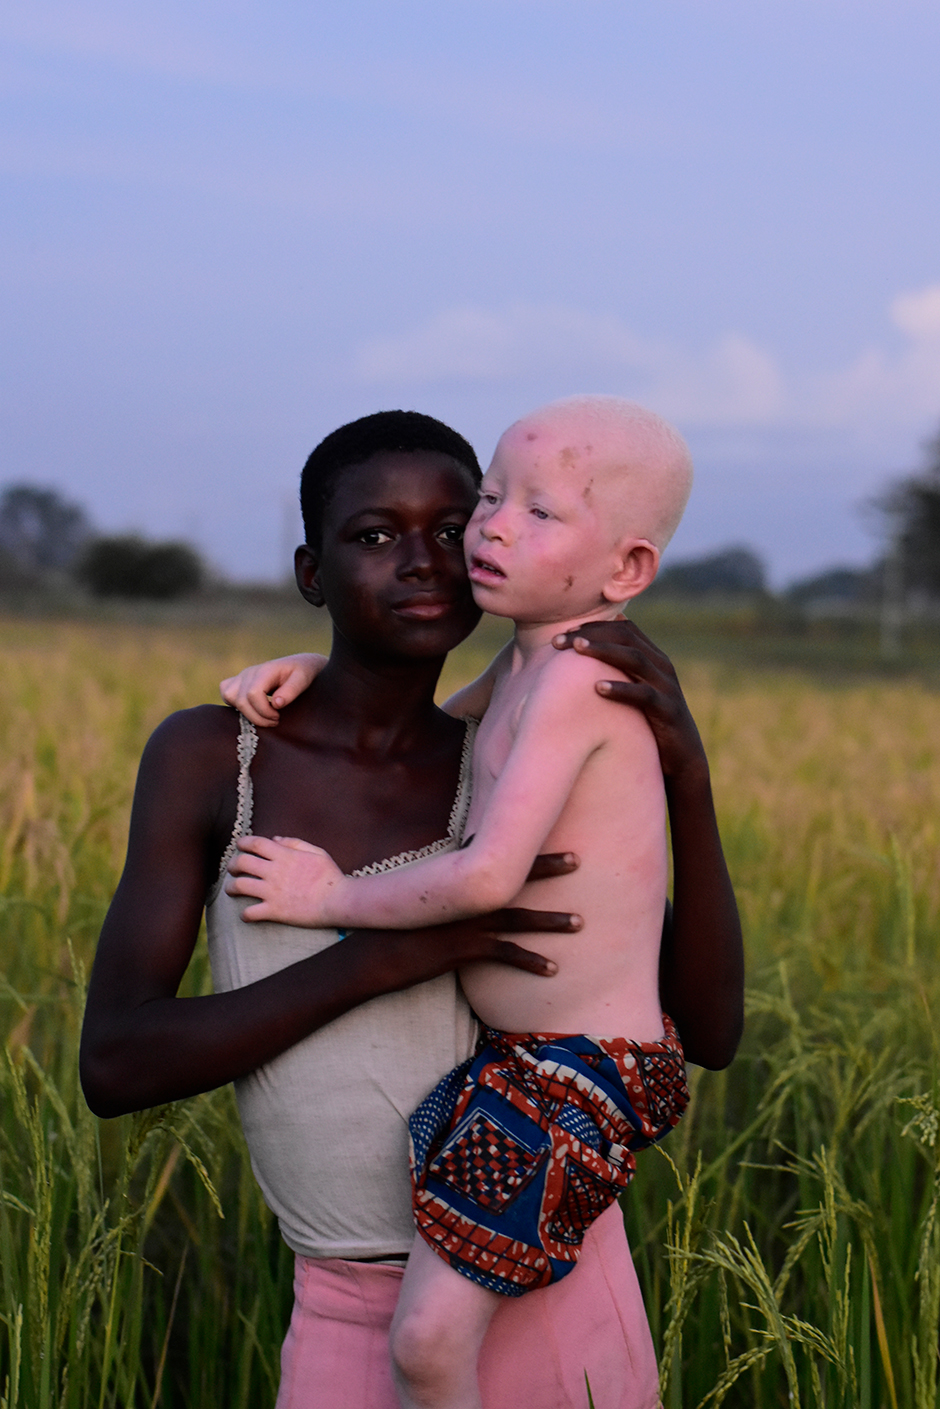 Photographer grabs over GHC30,000 cash prize after releasing photo of albino girl